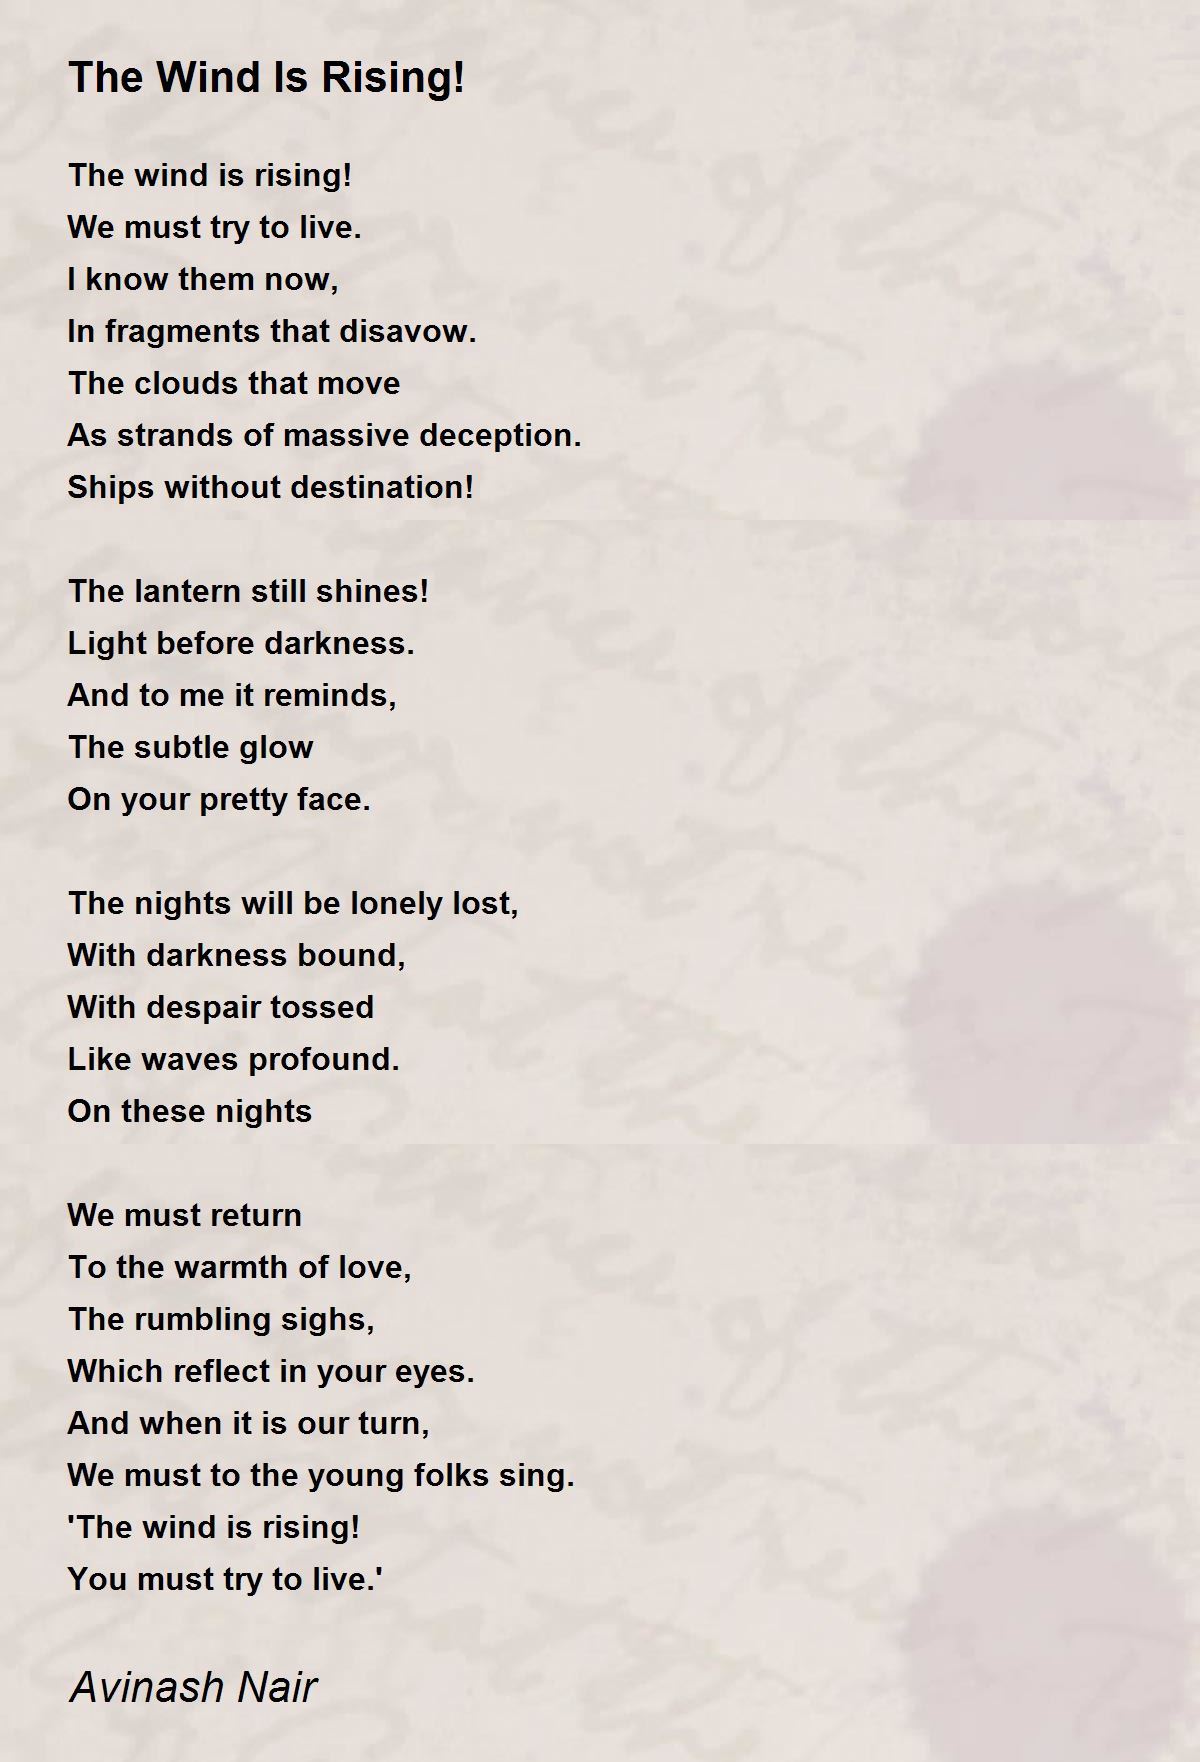 The Wind Is Rising! - The Wind Is Rising! Poem by Avinash Nair